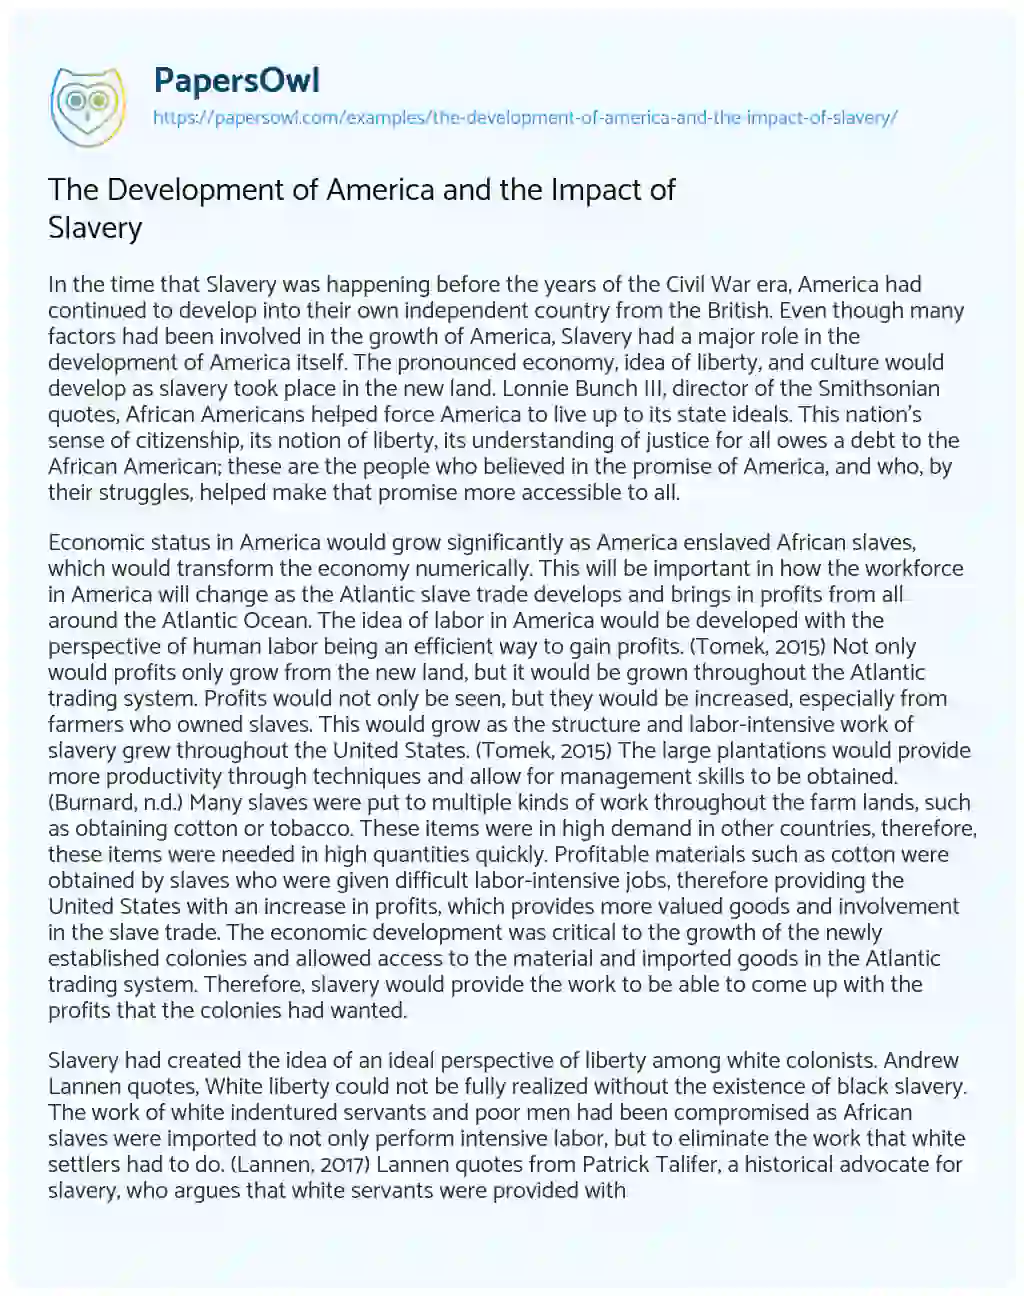 Essay on The Development of America and the Impact of Slavery